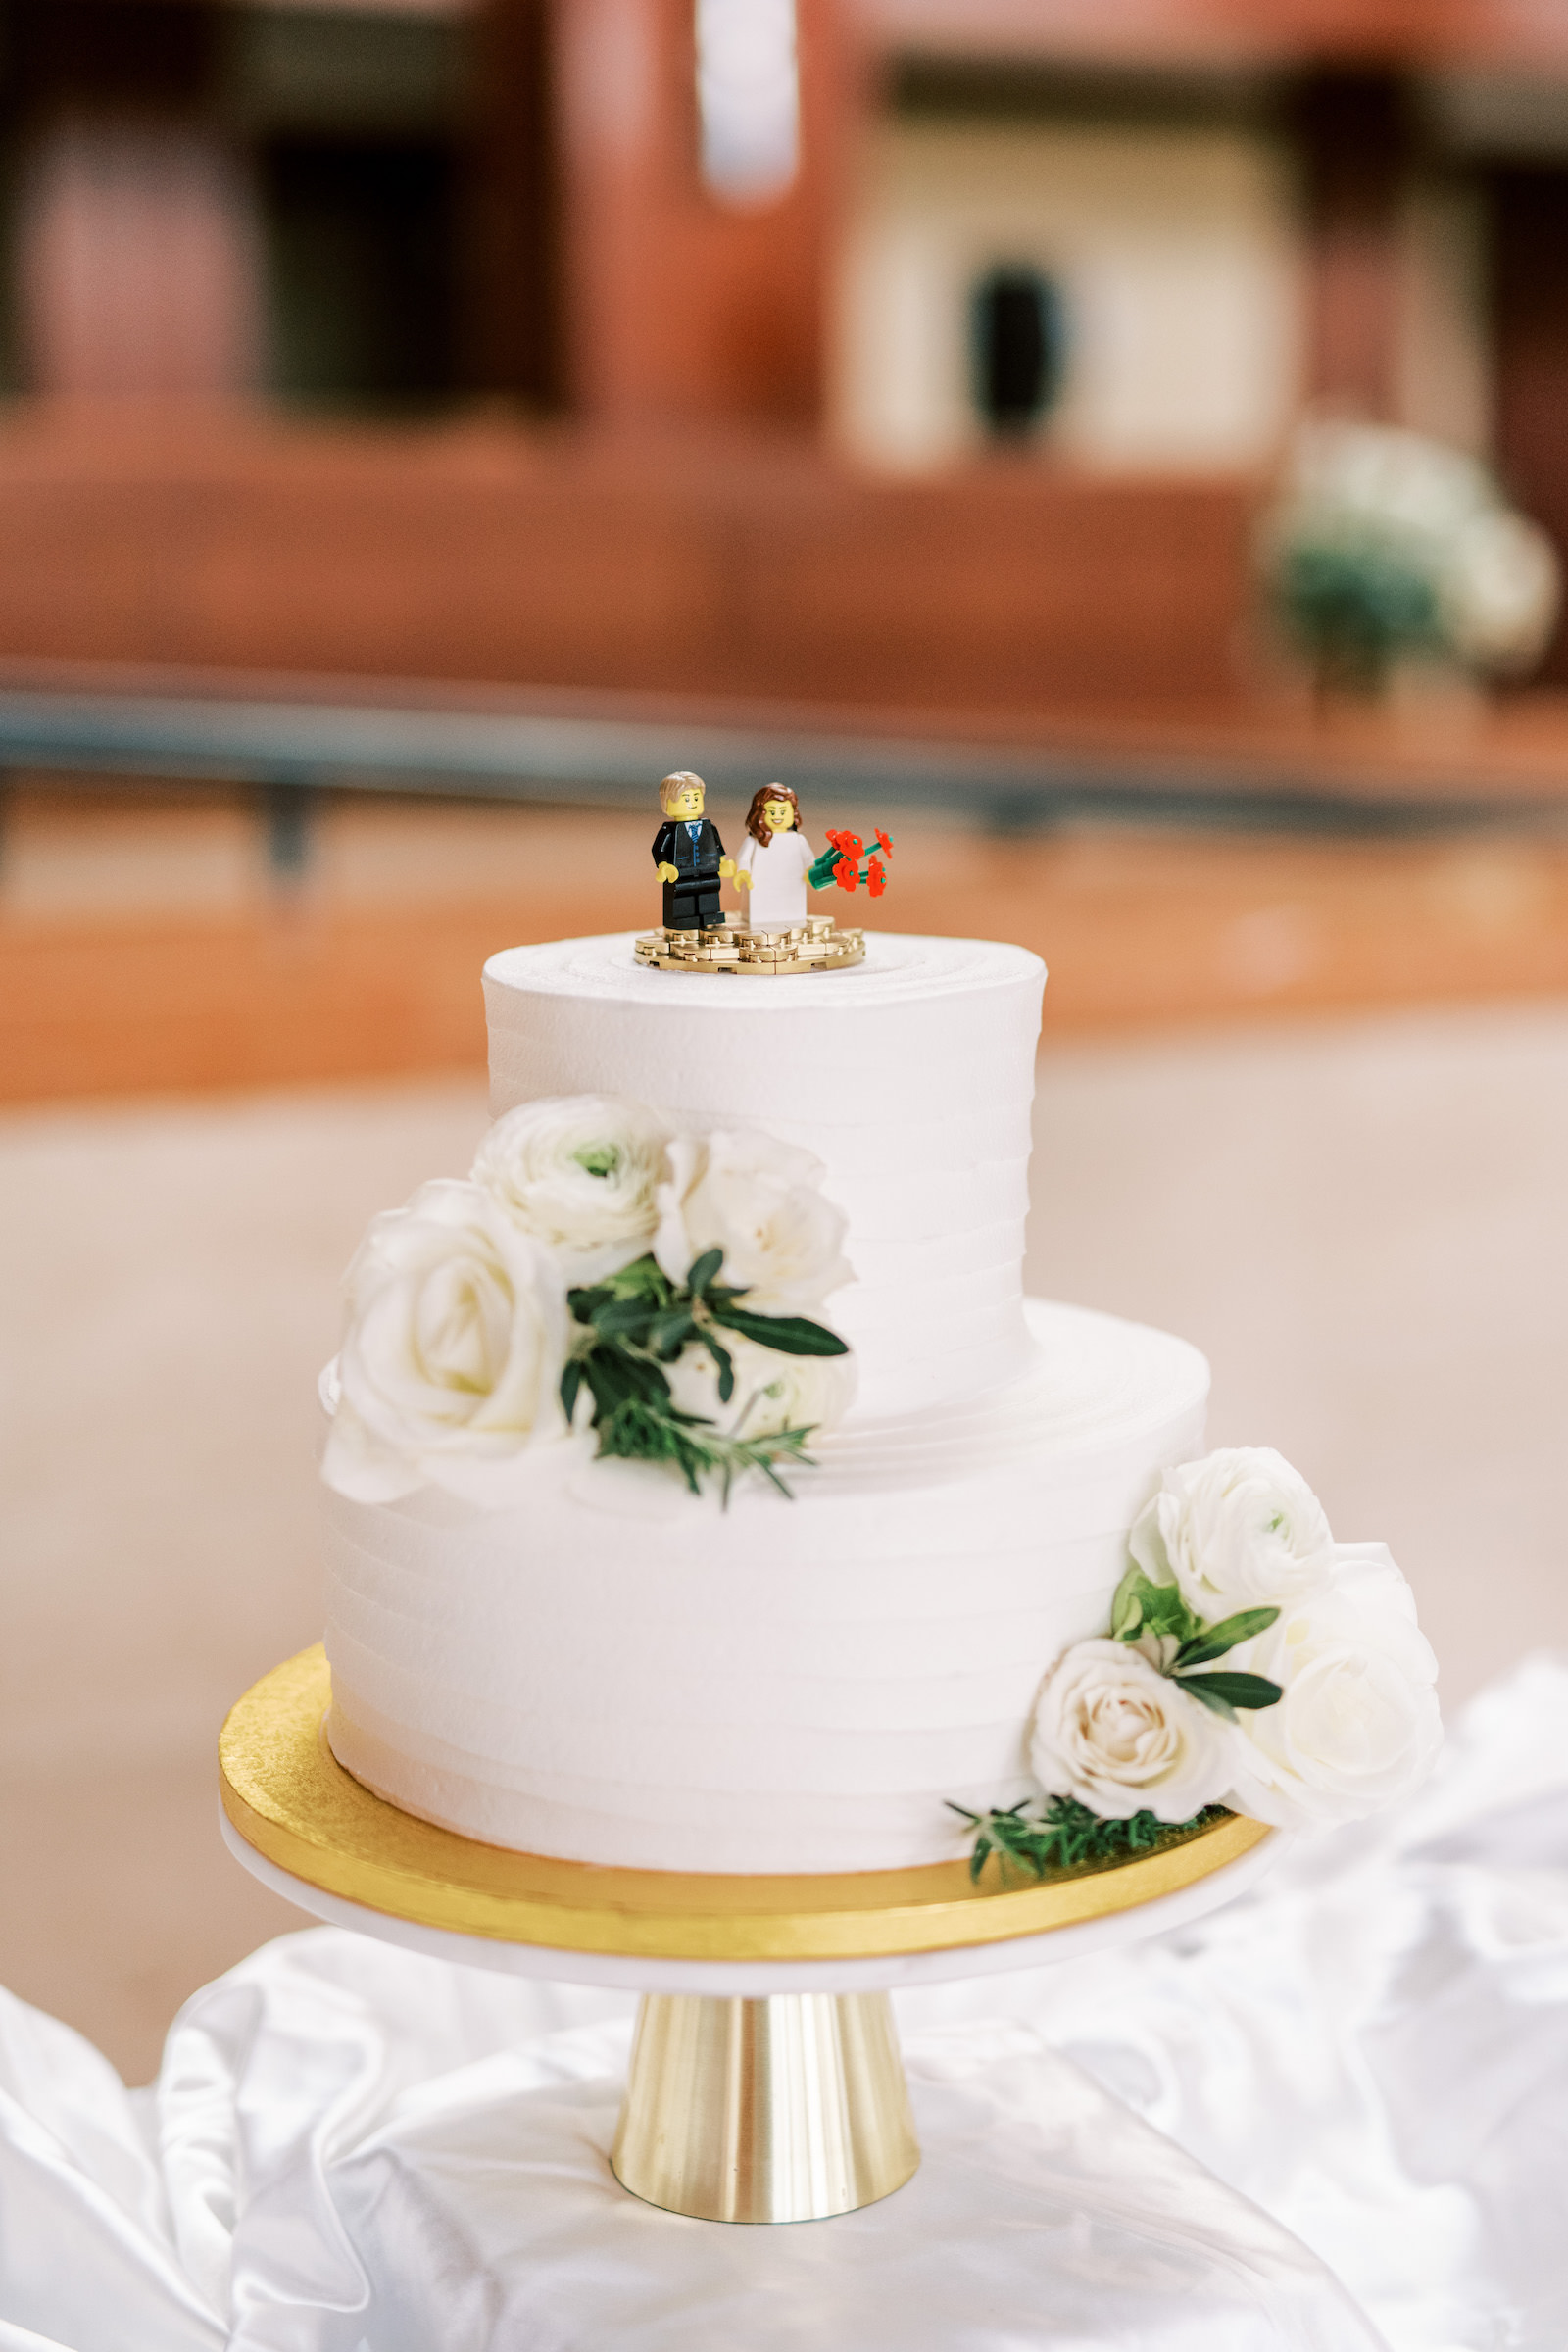 Two Tier White Wedding Cake with White Roses and Custom Unique Cake Topper | Tampa Bay Wedding Photographer Kera Photography